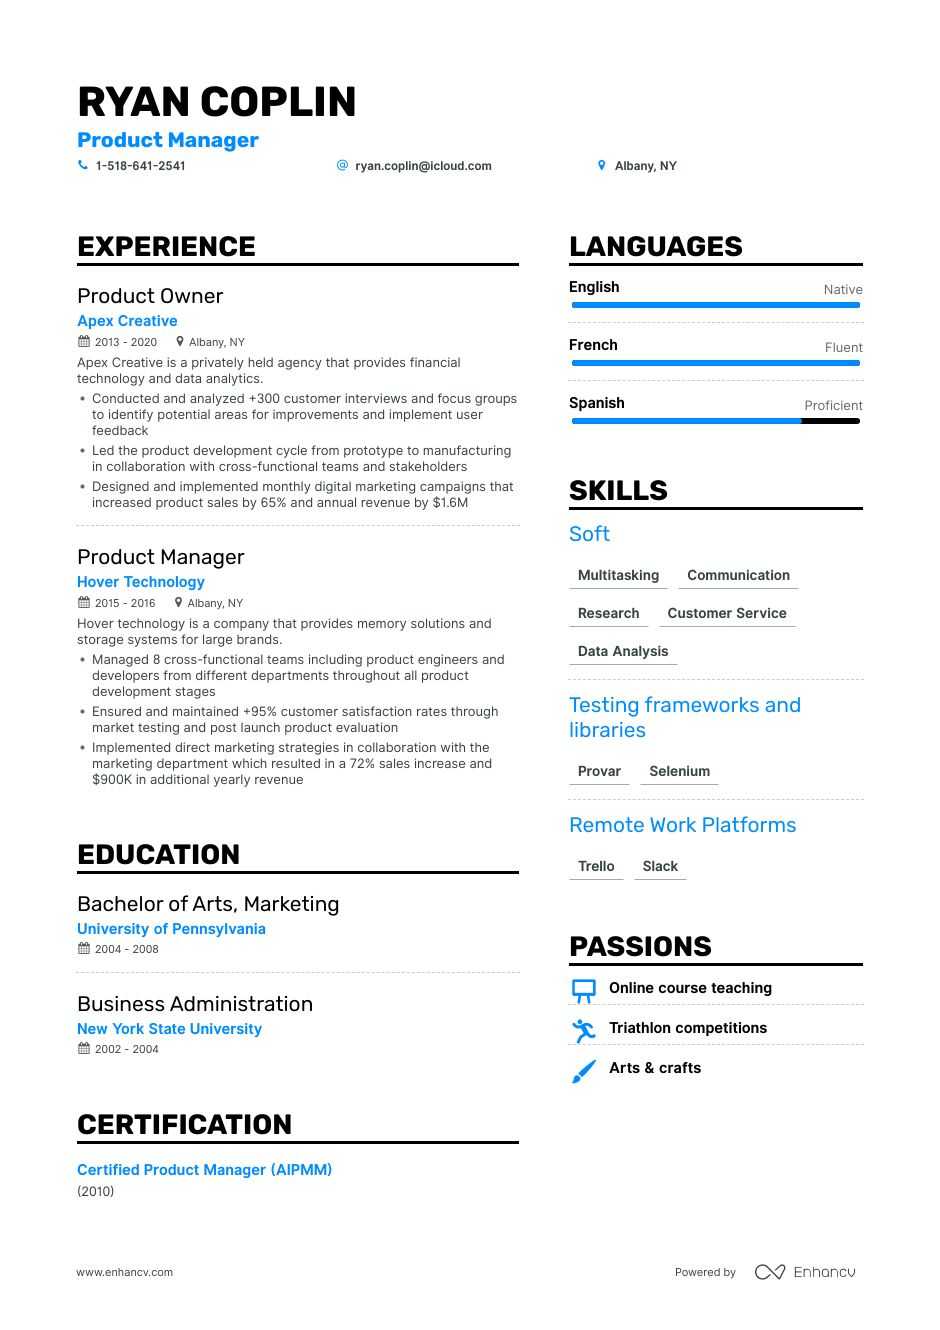 Work From Home Resume Samples + Pro tips